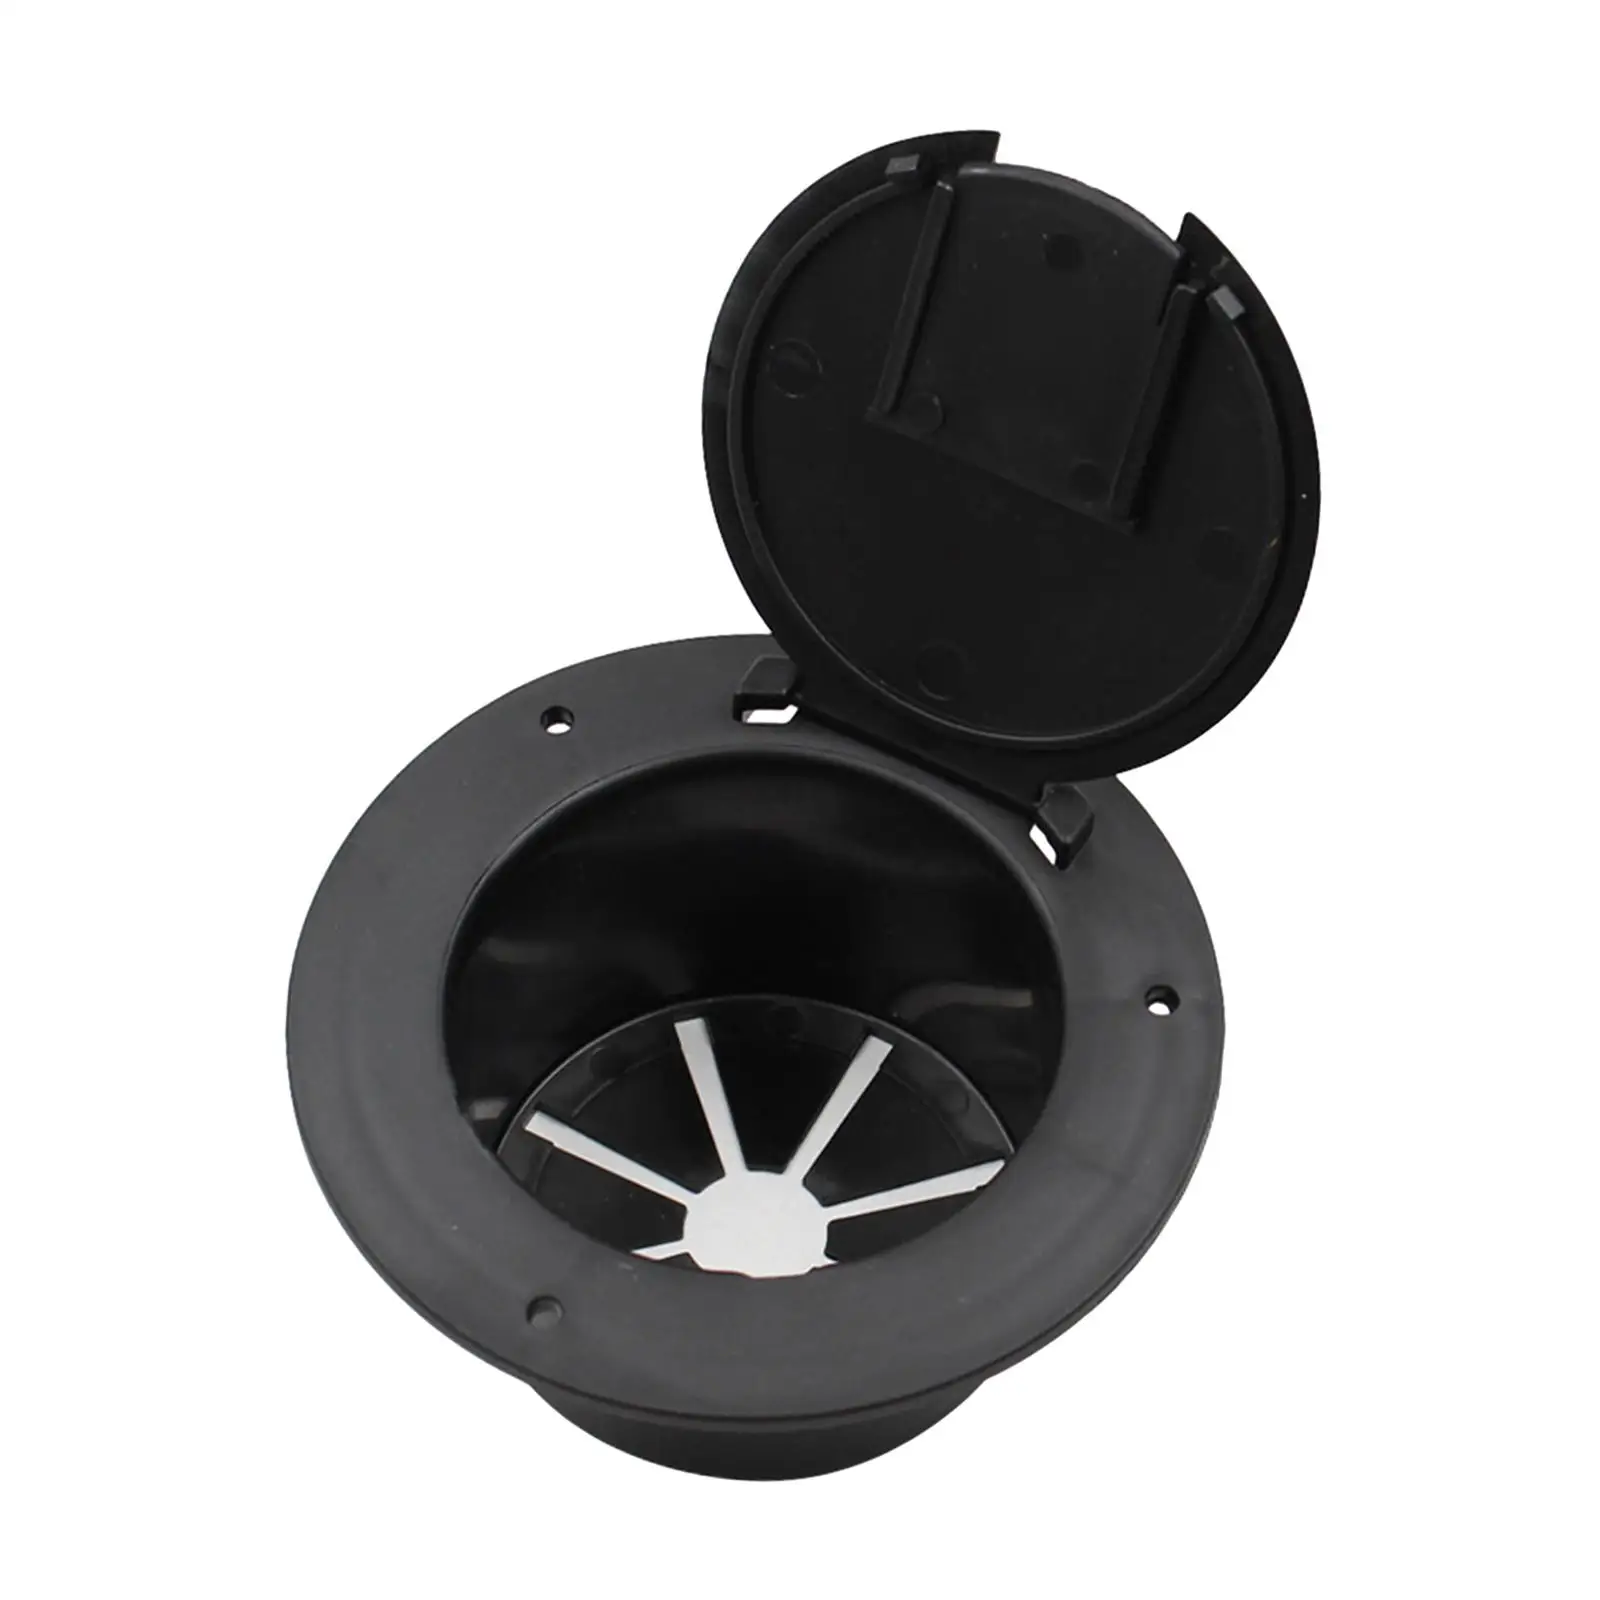 RV Electrical Cable Hatch Black Round Accessory for Camper Yacht Boat